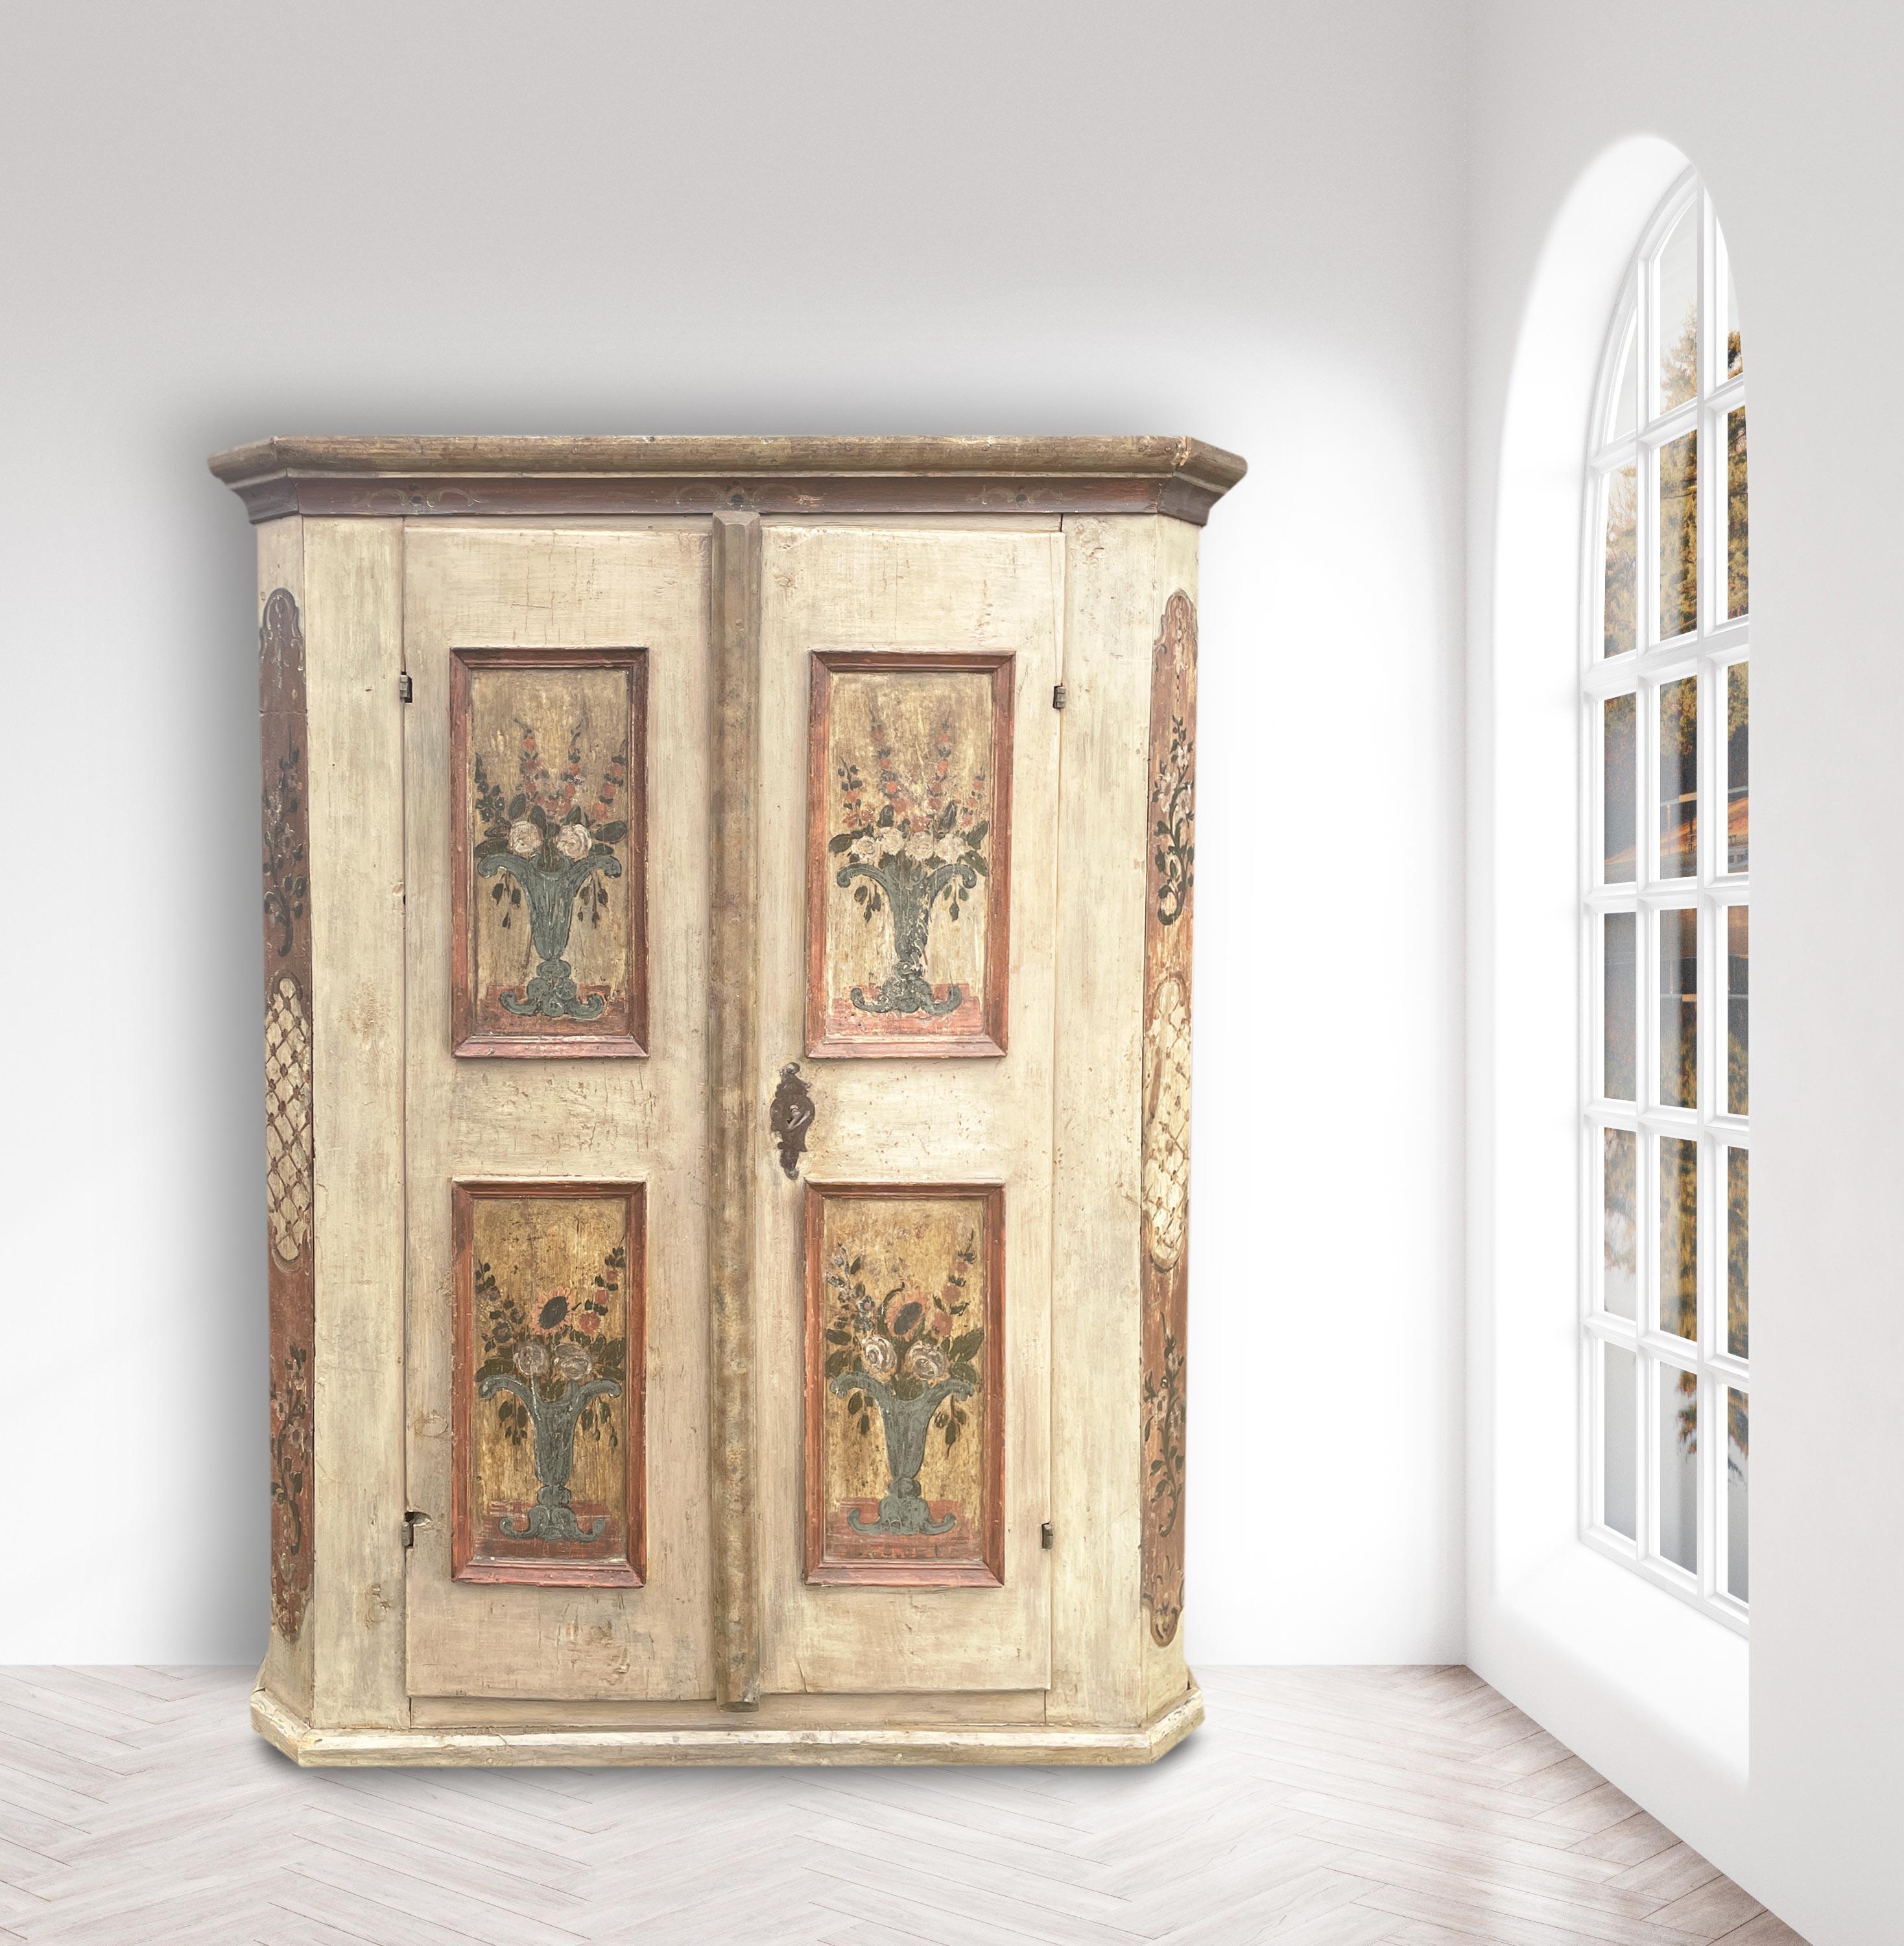 Antique White Tyrolean wardrobe

Period: approximately 1780
Origin: Tyrol (Northern Italy, Alpine Region)
Essence: Fir
Height: 165cm
Width: 122cm (132cm at the frames)
Depth: 43 cm (48 cm at the frames)

Tyrolean painted wardrobe with two doors,